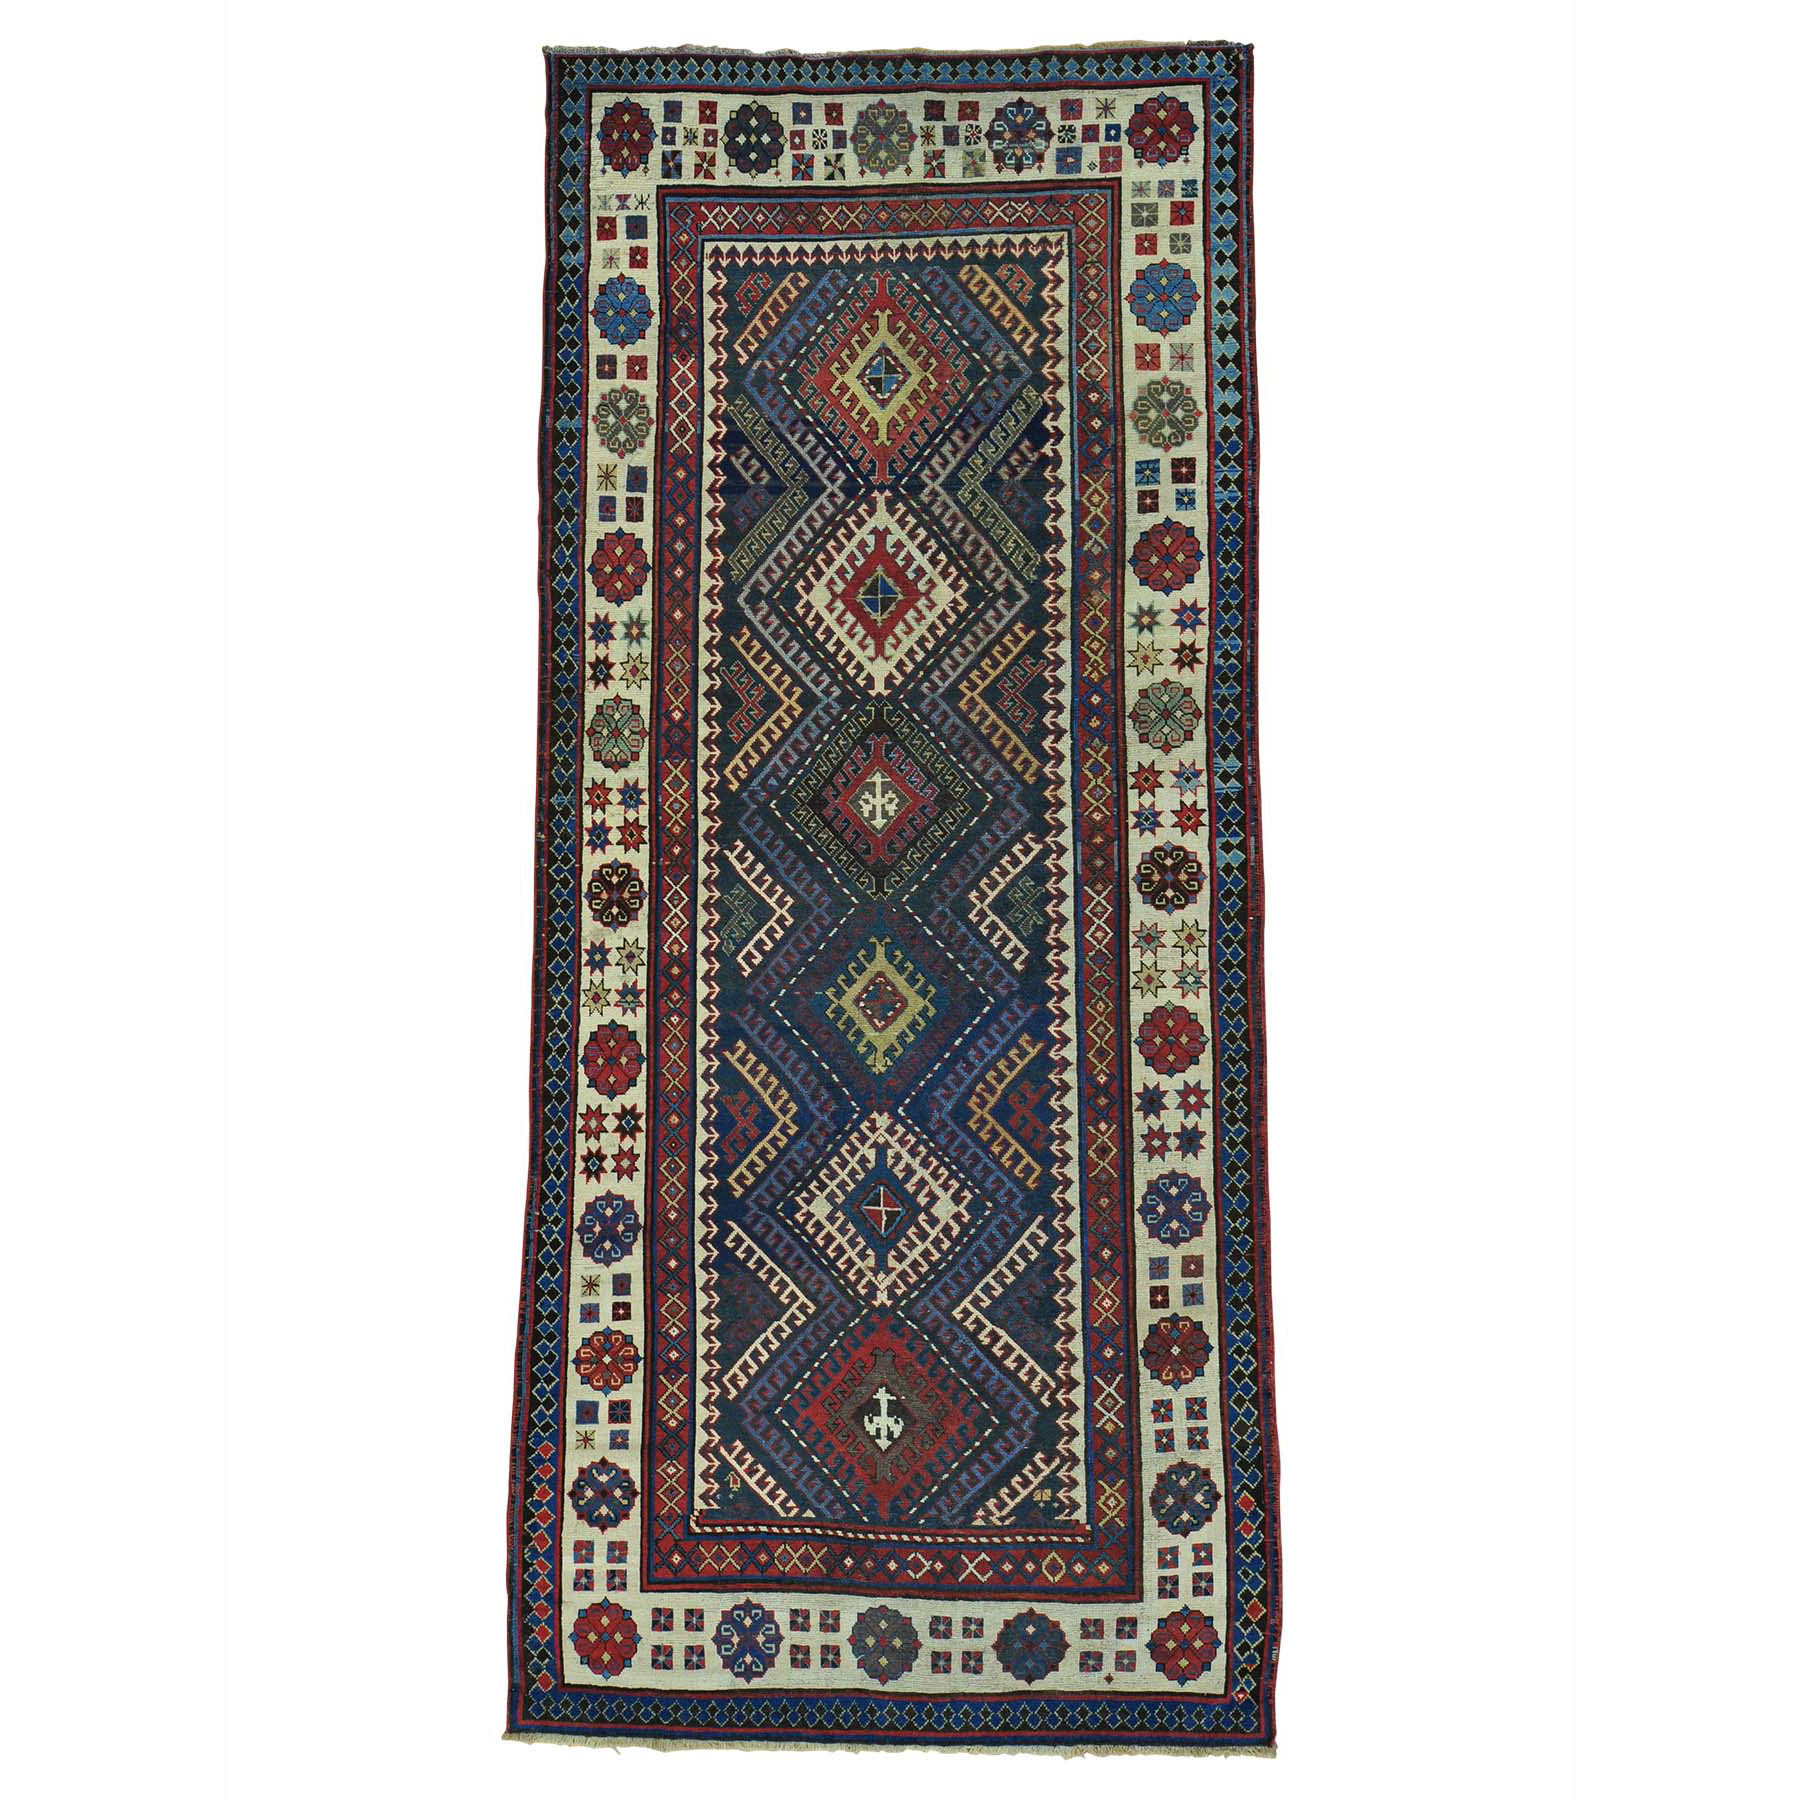 4'x9' Antique Caucasian Talesh Exc Cond Wide Runner Hand Woven Rug 